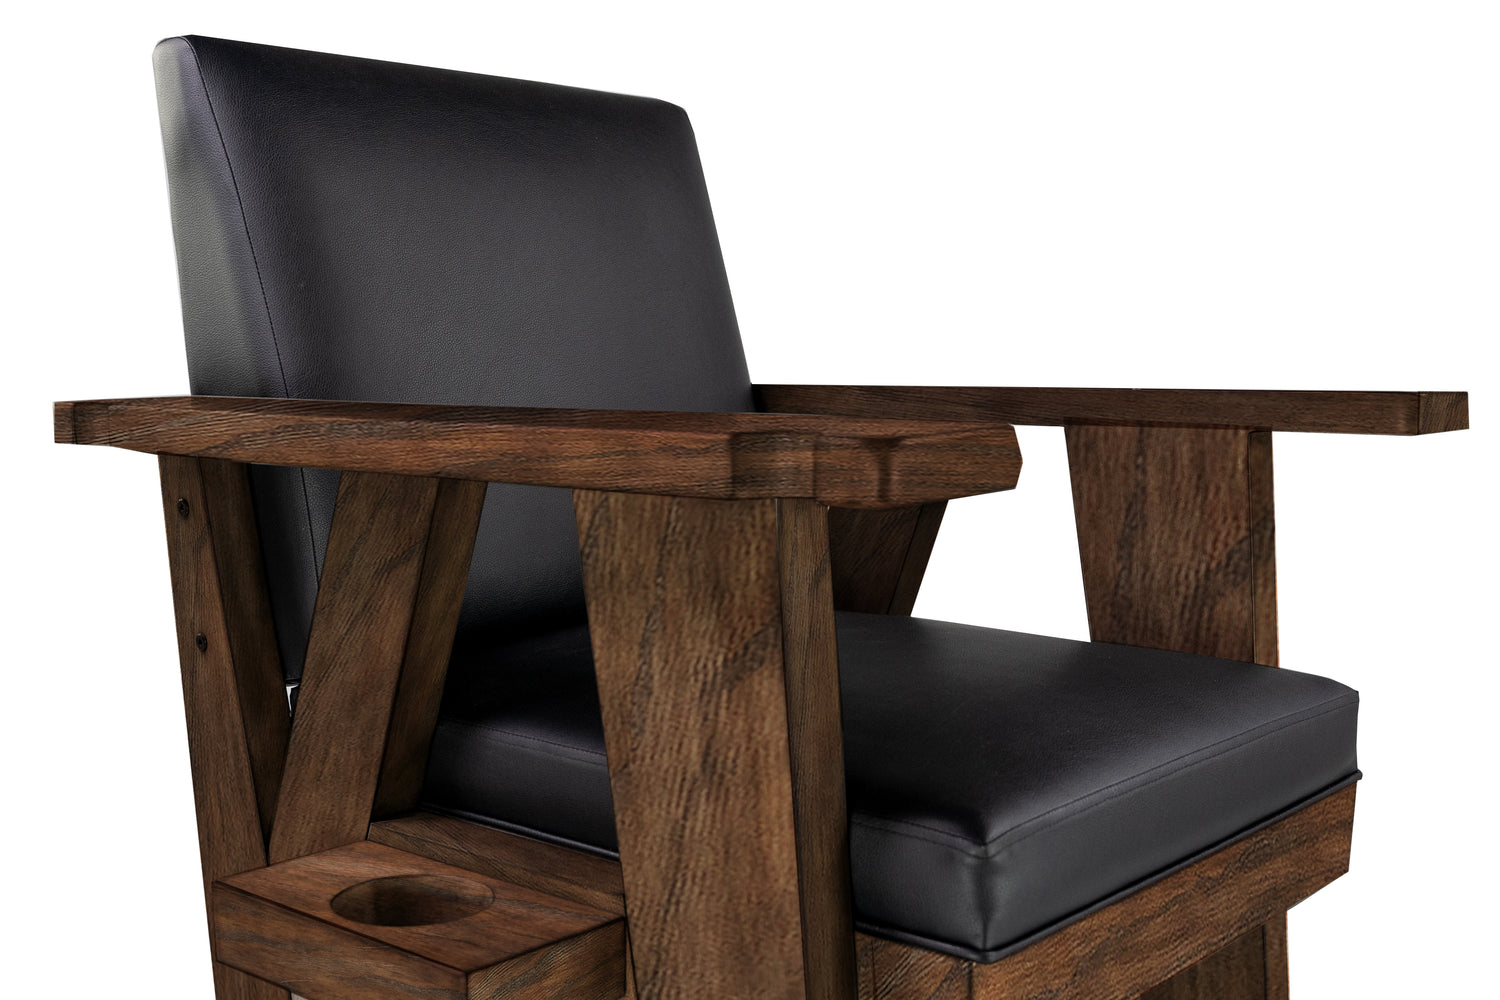 Legacy Billiards Sterling Spectator Chair in Whiskey Barrel Finish - Chair Closeup